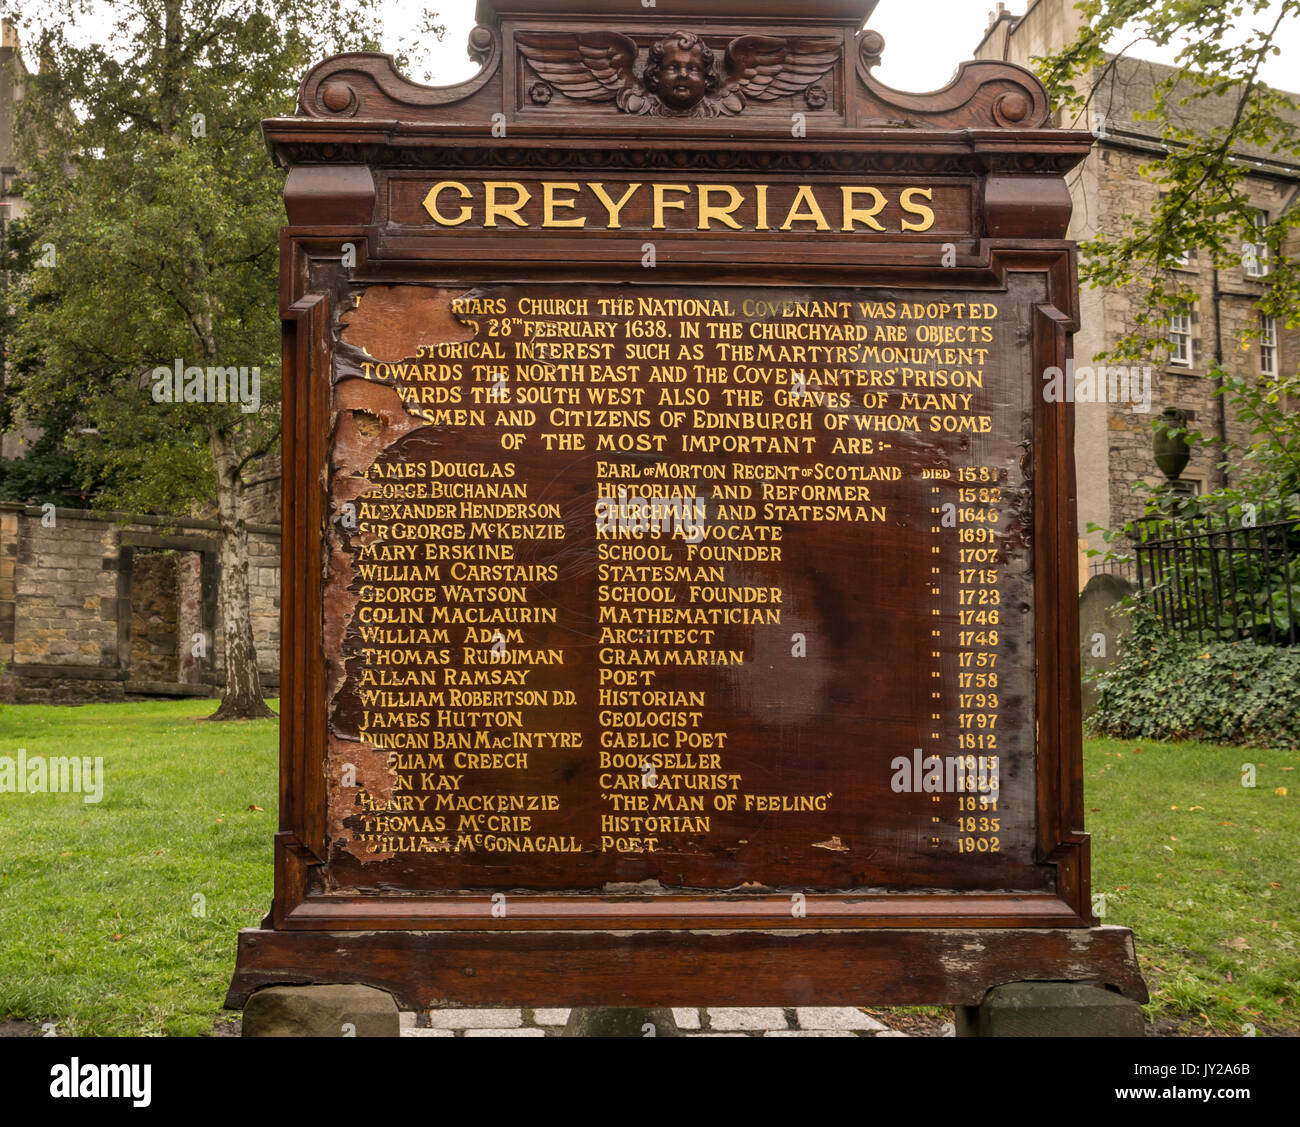 Information board at entrance to Greyfriar's churchyard, Edinburgh, Scotland, UK, listing names of famous people buried in the churchyard burial groun Stock Photo